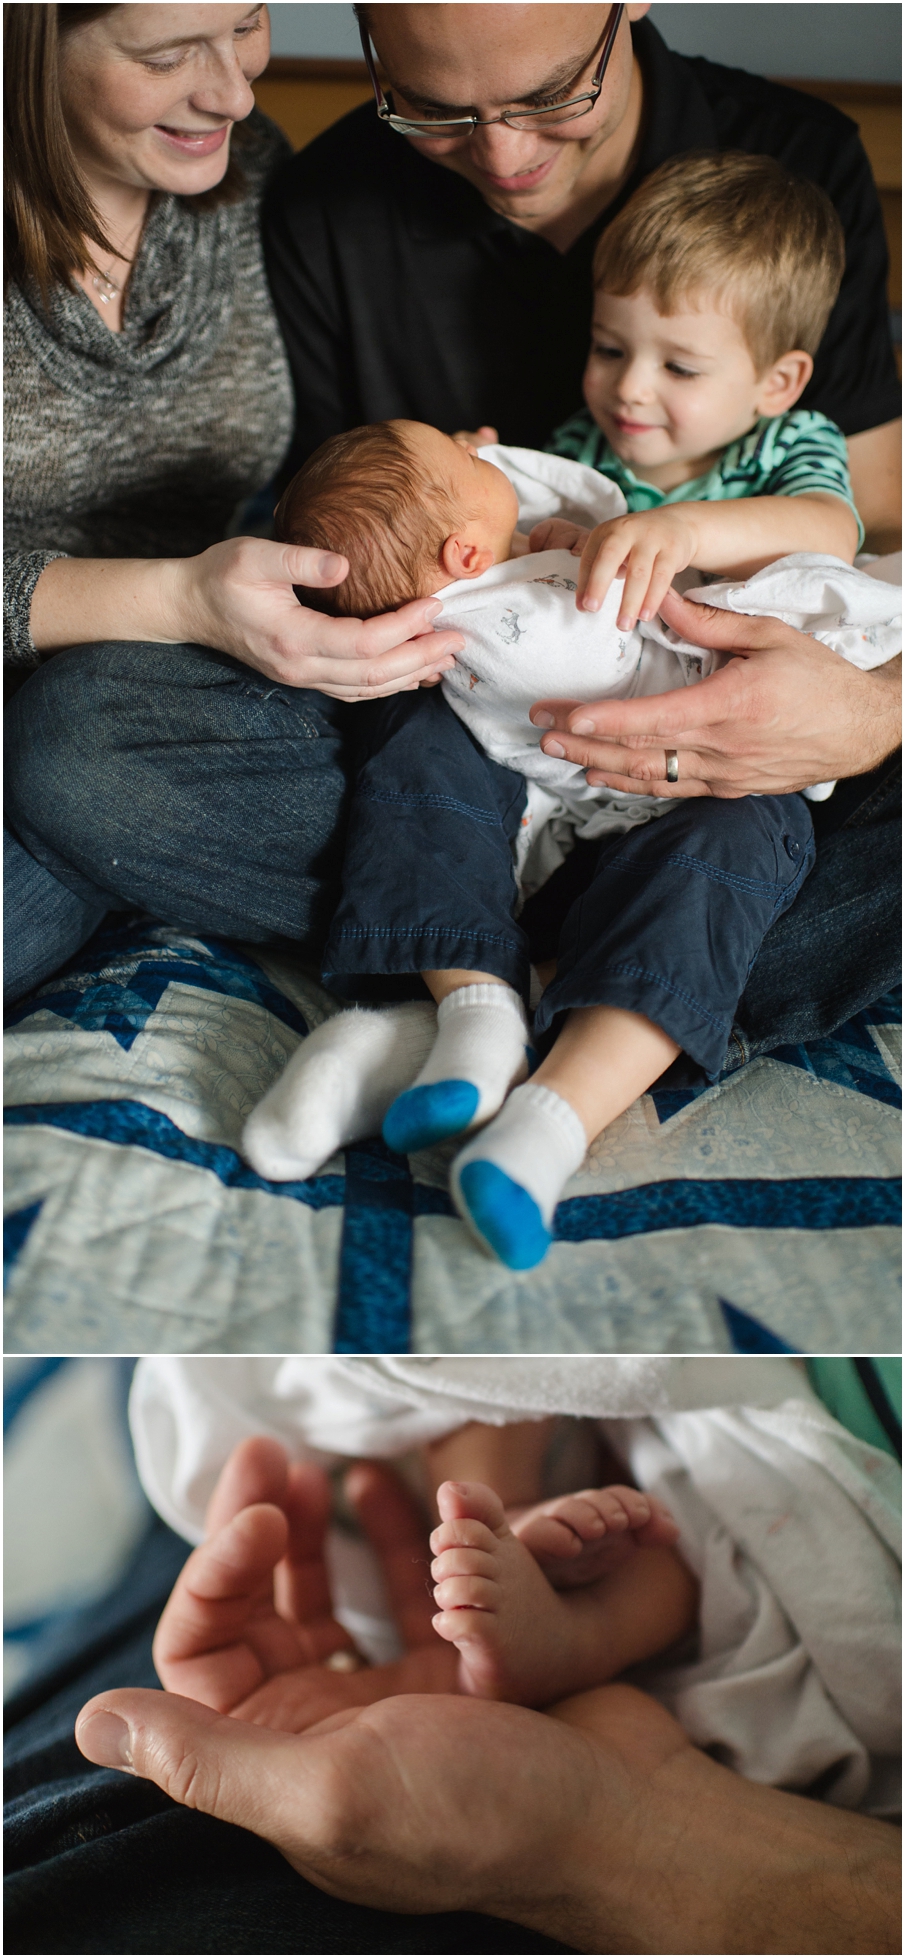 View More: http://freshframephotography.pass.us/baby-ryder-welcome